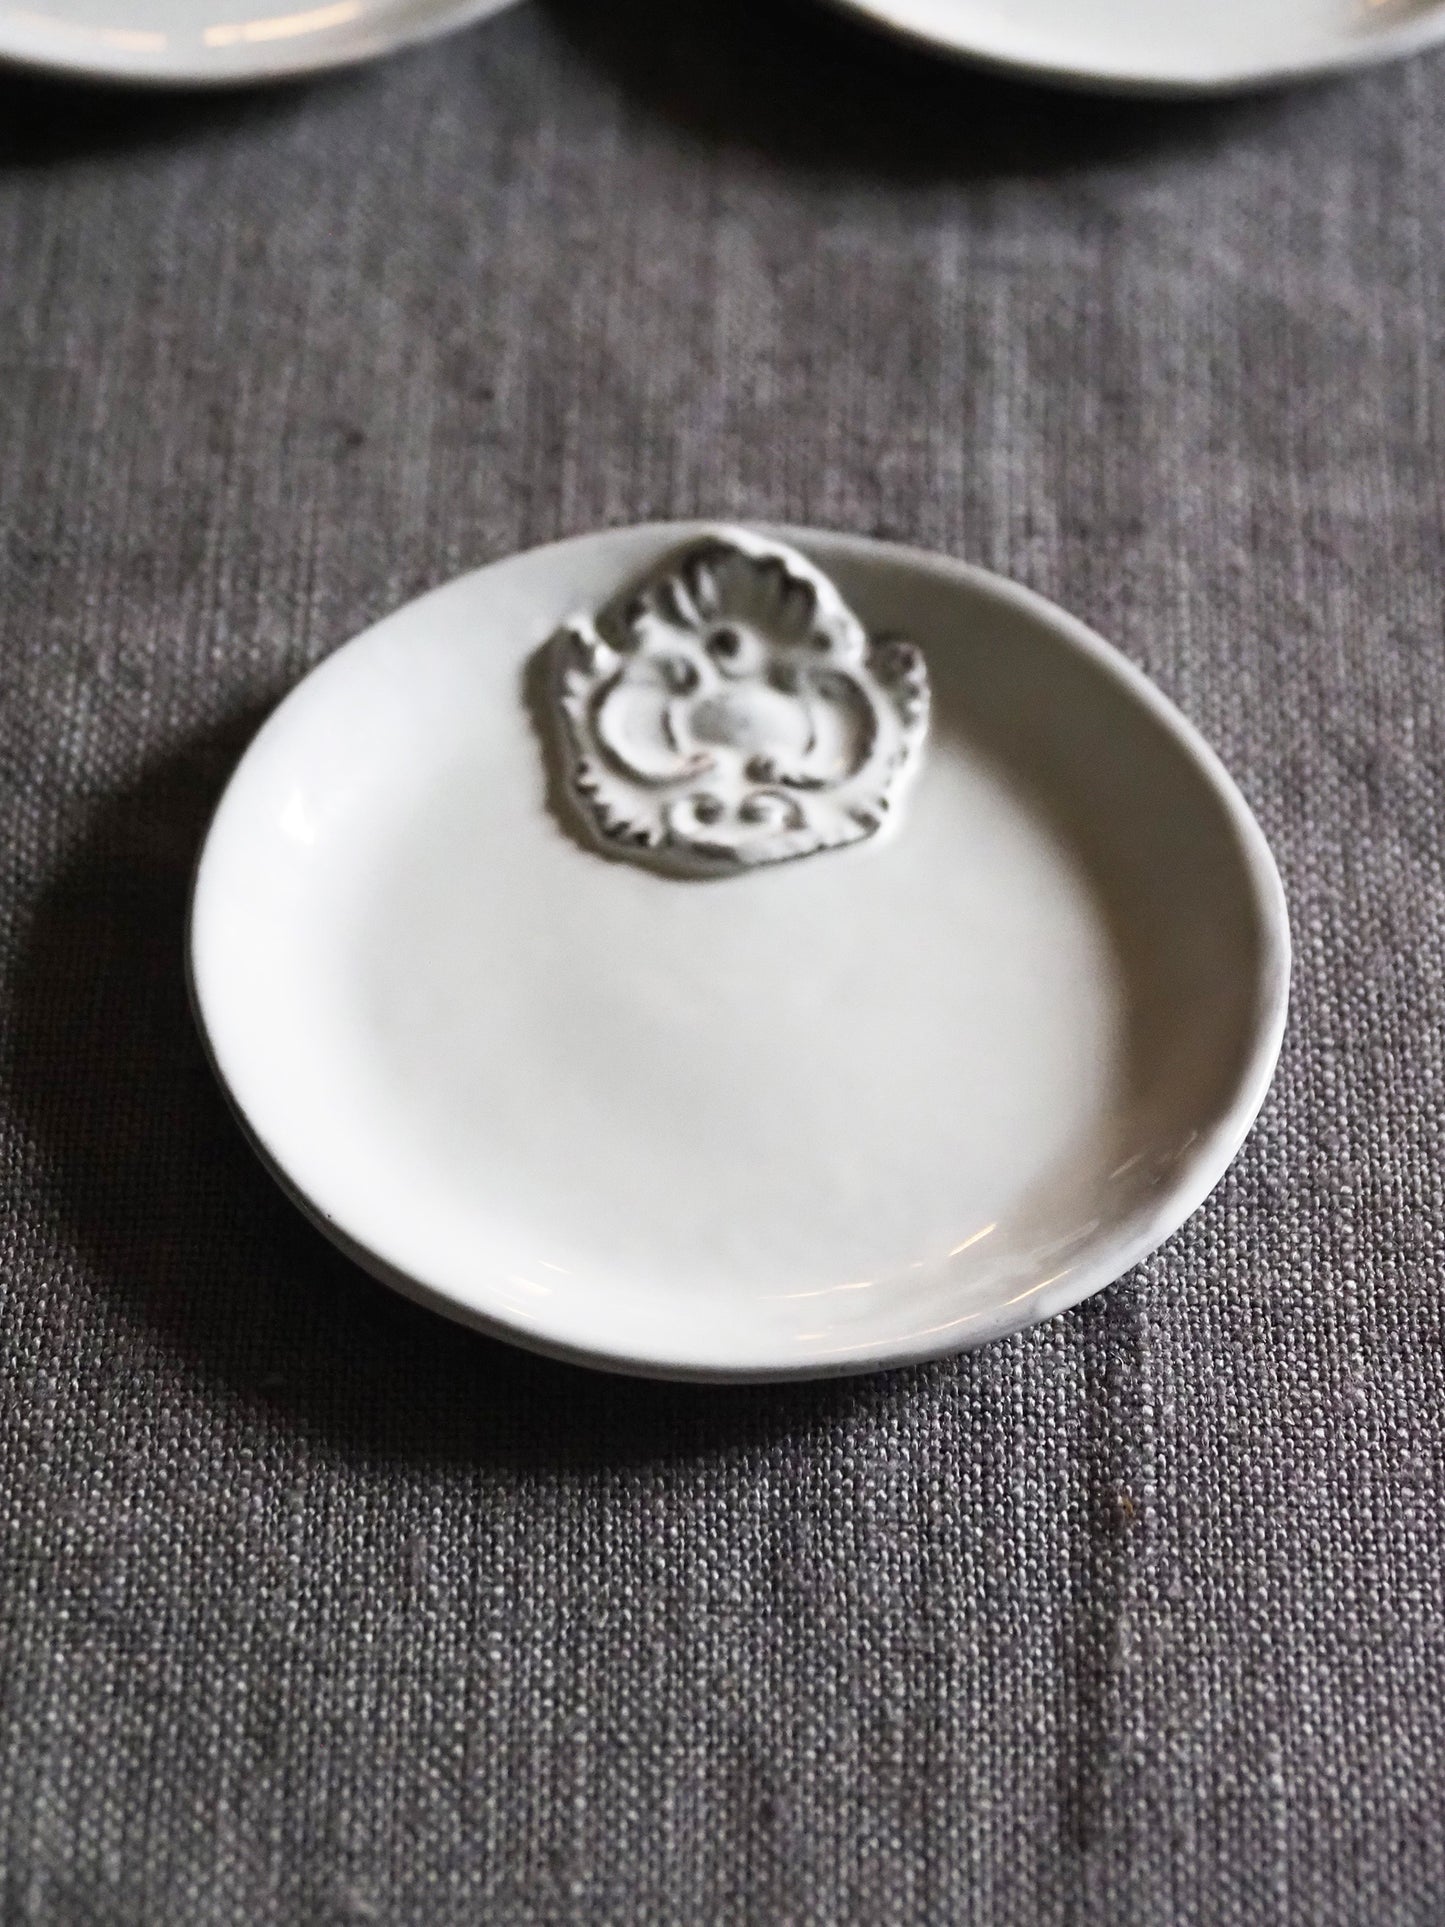 Charles Butter plate